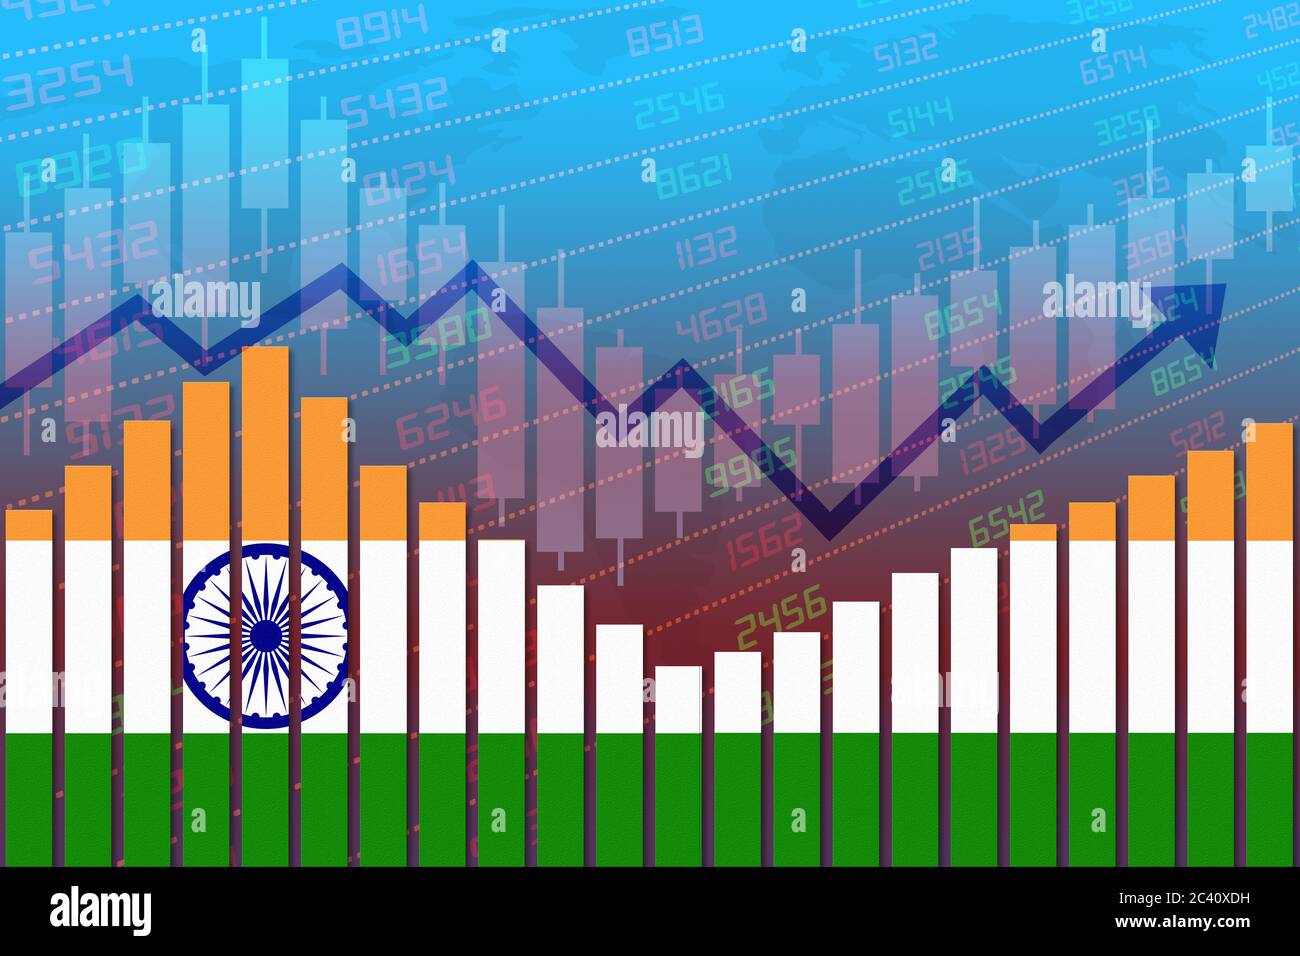 Flag of India on bar chart concept of economic recovery and business improving after crisis such as Covid-19 or other catastrophe as economy and busin Stock Photo